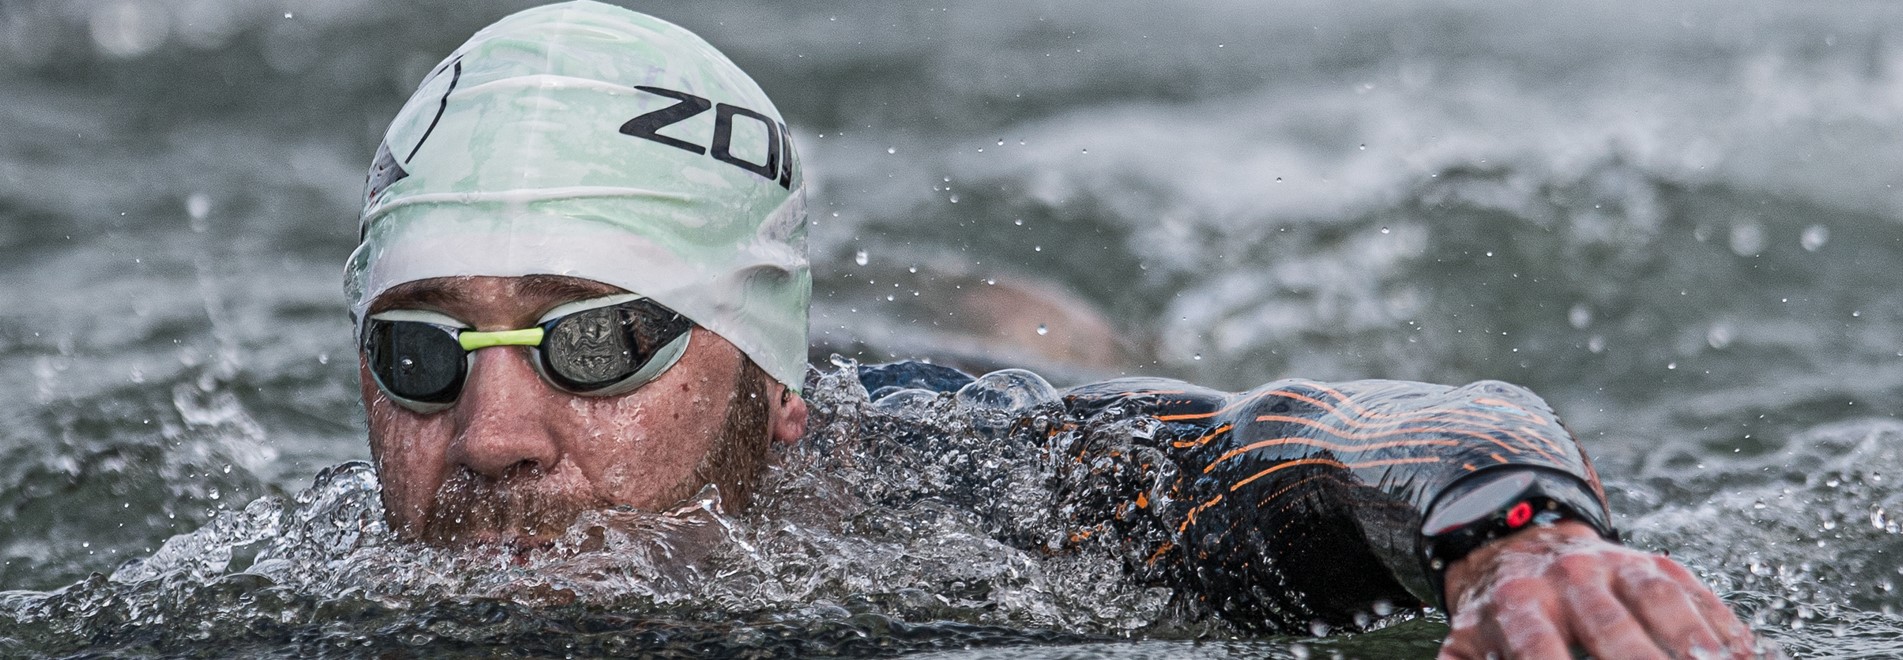 Karapiro Swim - Frequently Asked Questions